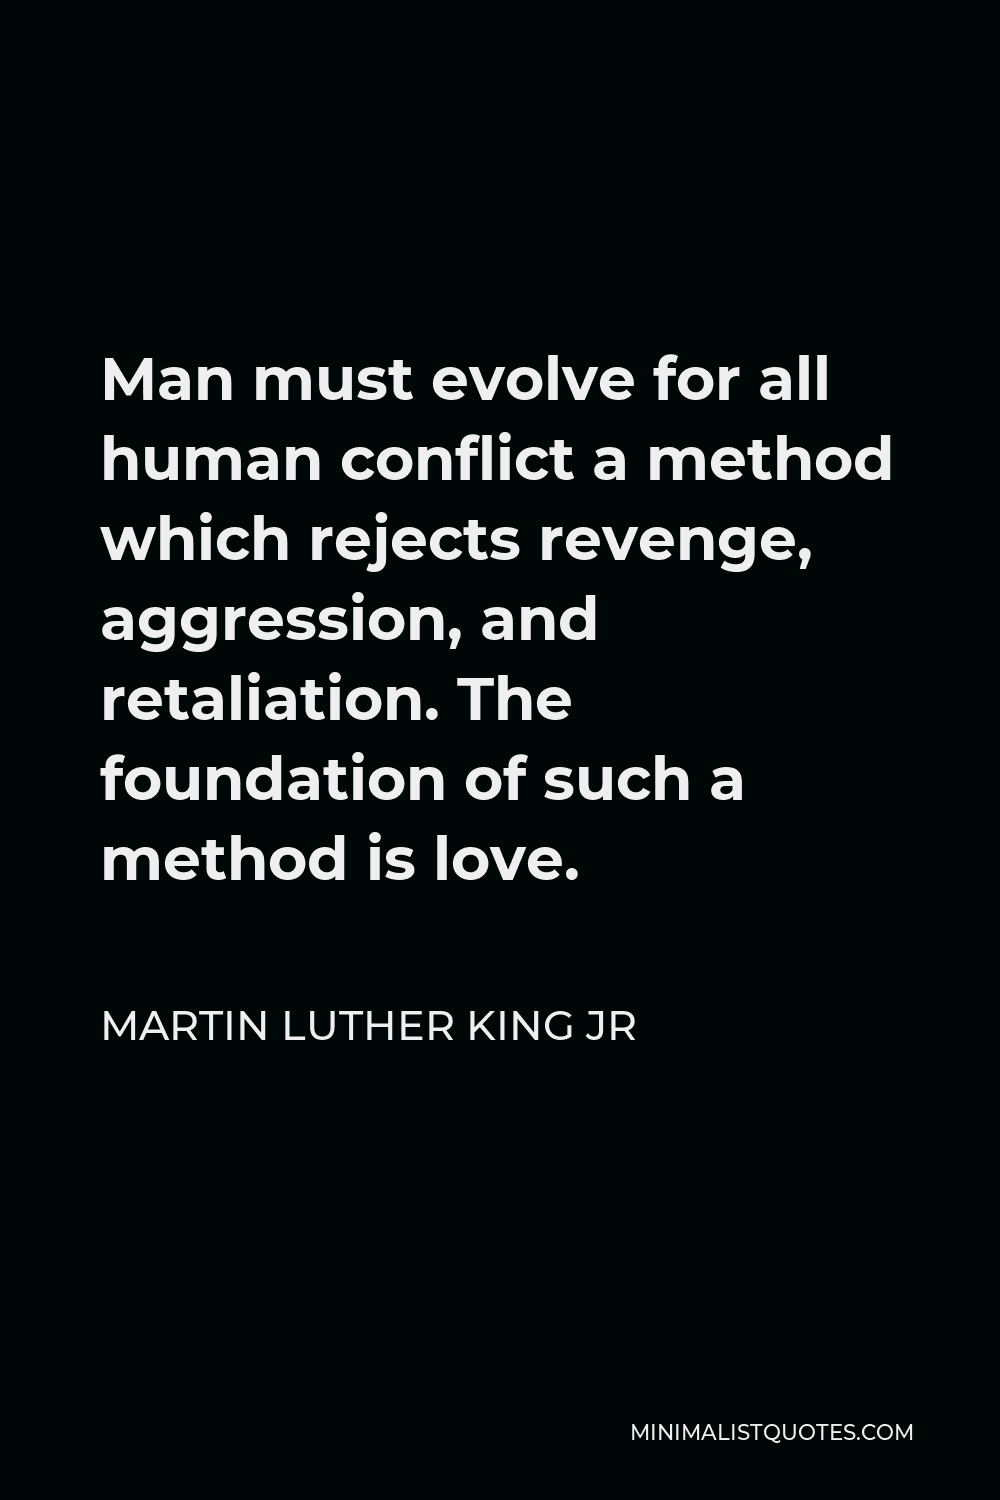 Martin Luther King Jr Quote Man Must Evolve For All Human Conflict A Method Which Rejects Revenge Aggression And Retaliation The Foundation Of Such A Method Is Love